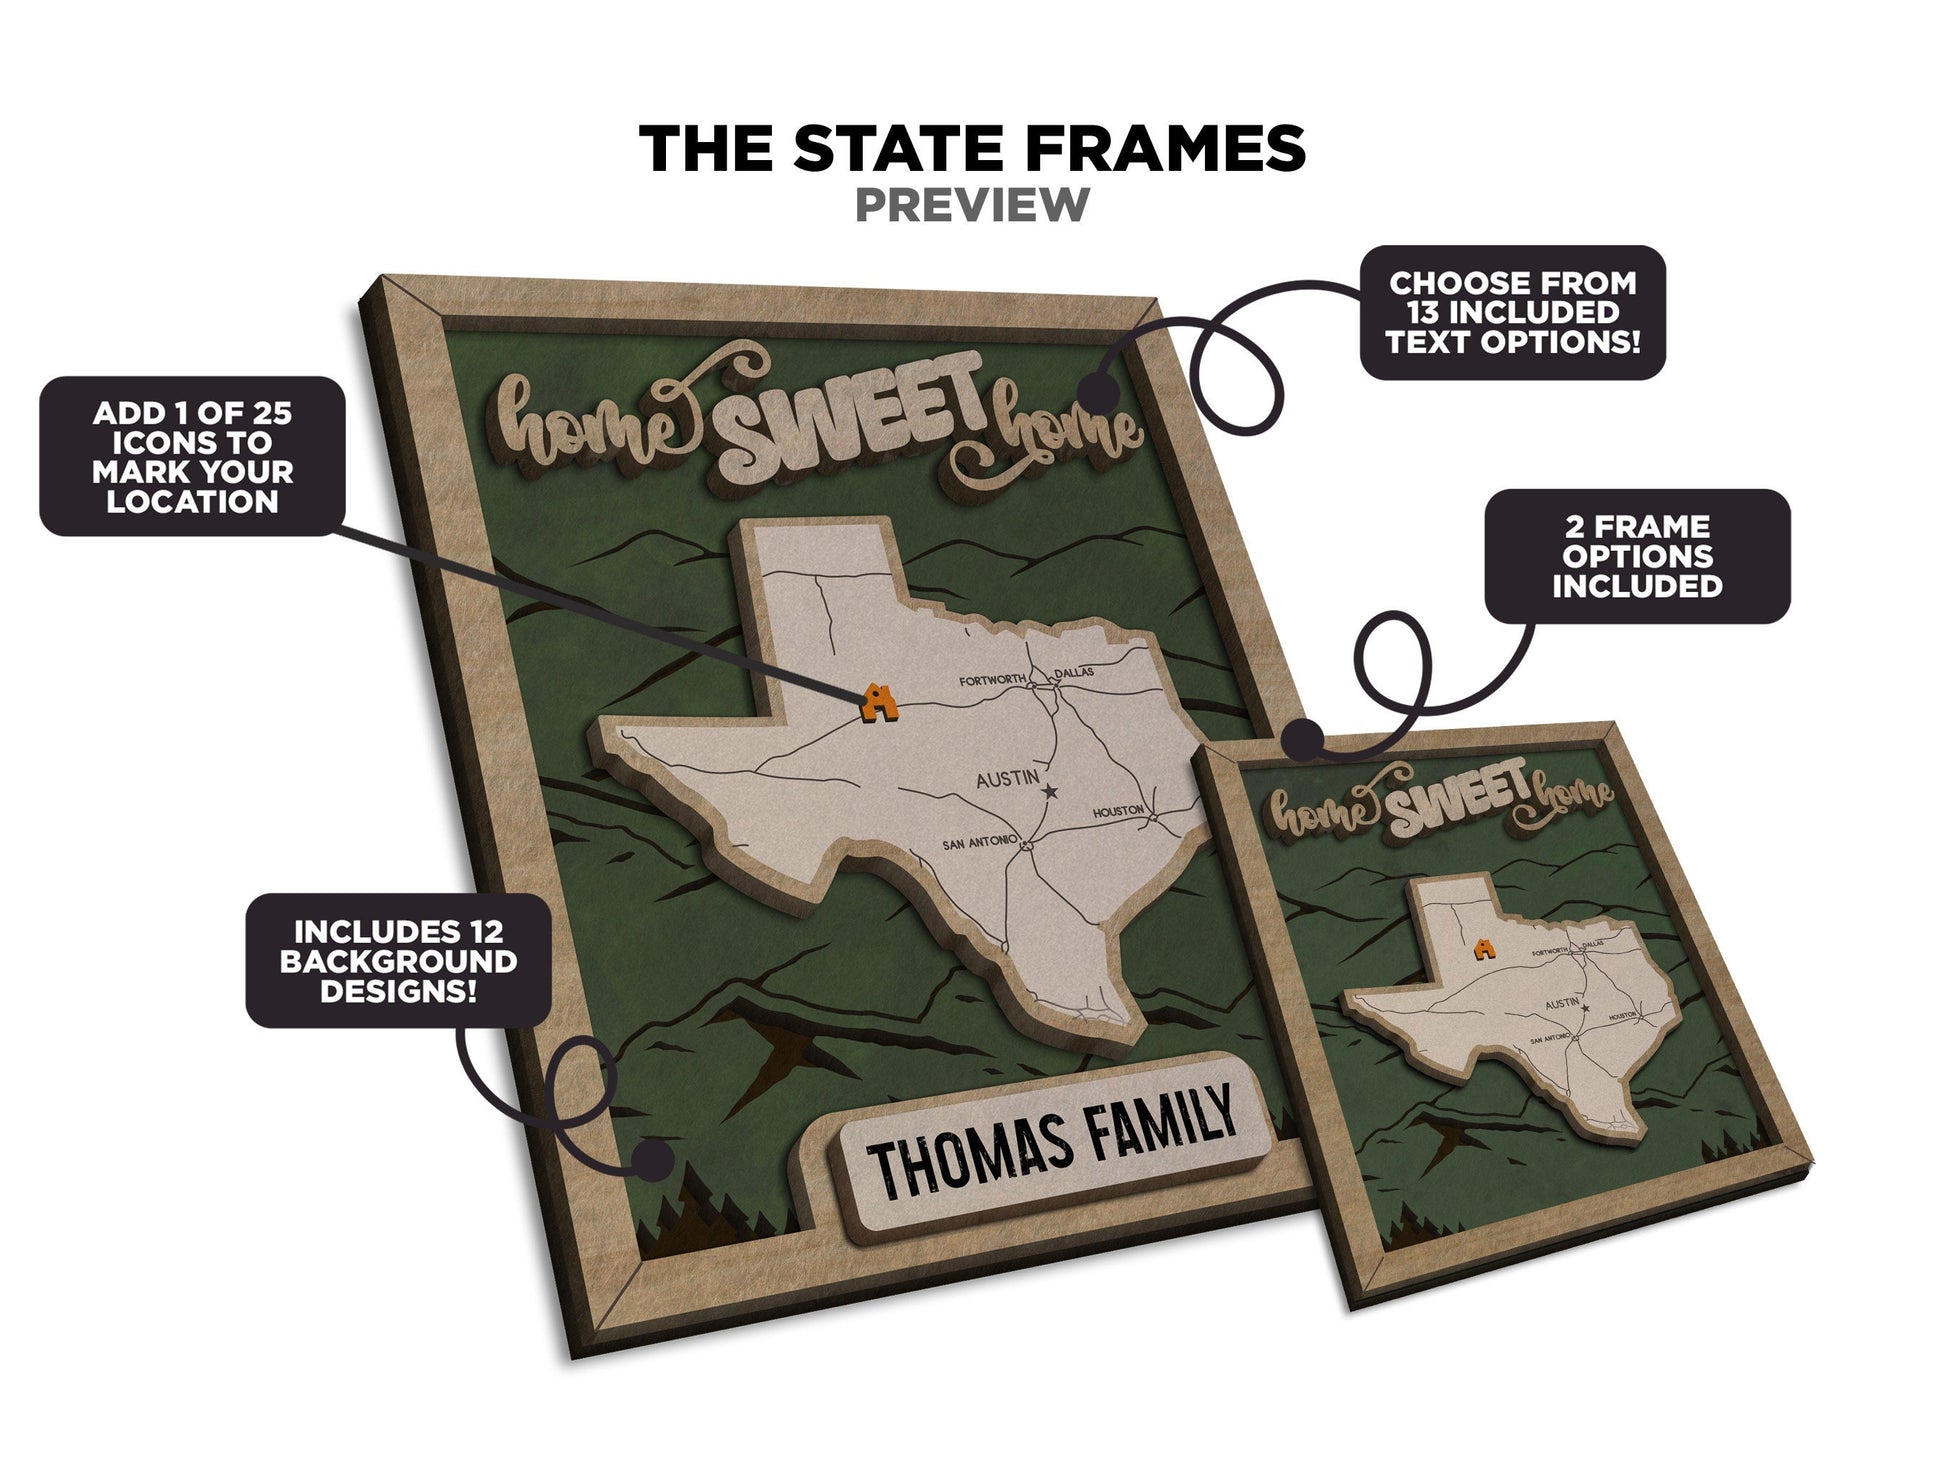 The New Mexico State Frame - 13 text options, 12 backgrounds, 25 icons Included - Make over 7,500 designs - Glowforge & Lightburn Tested